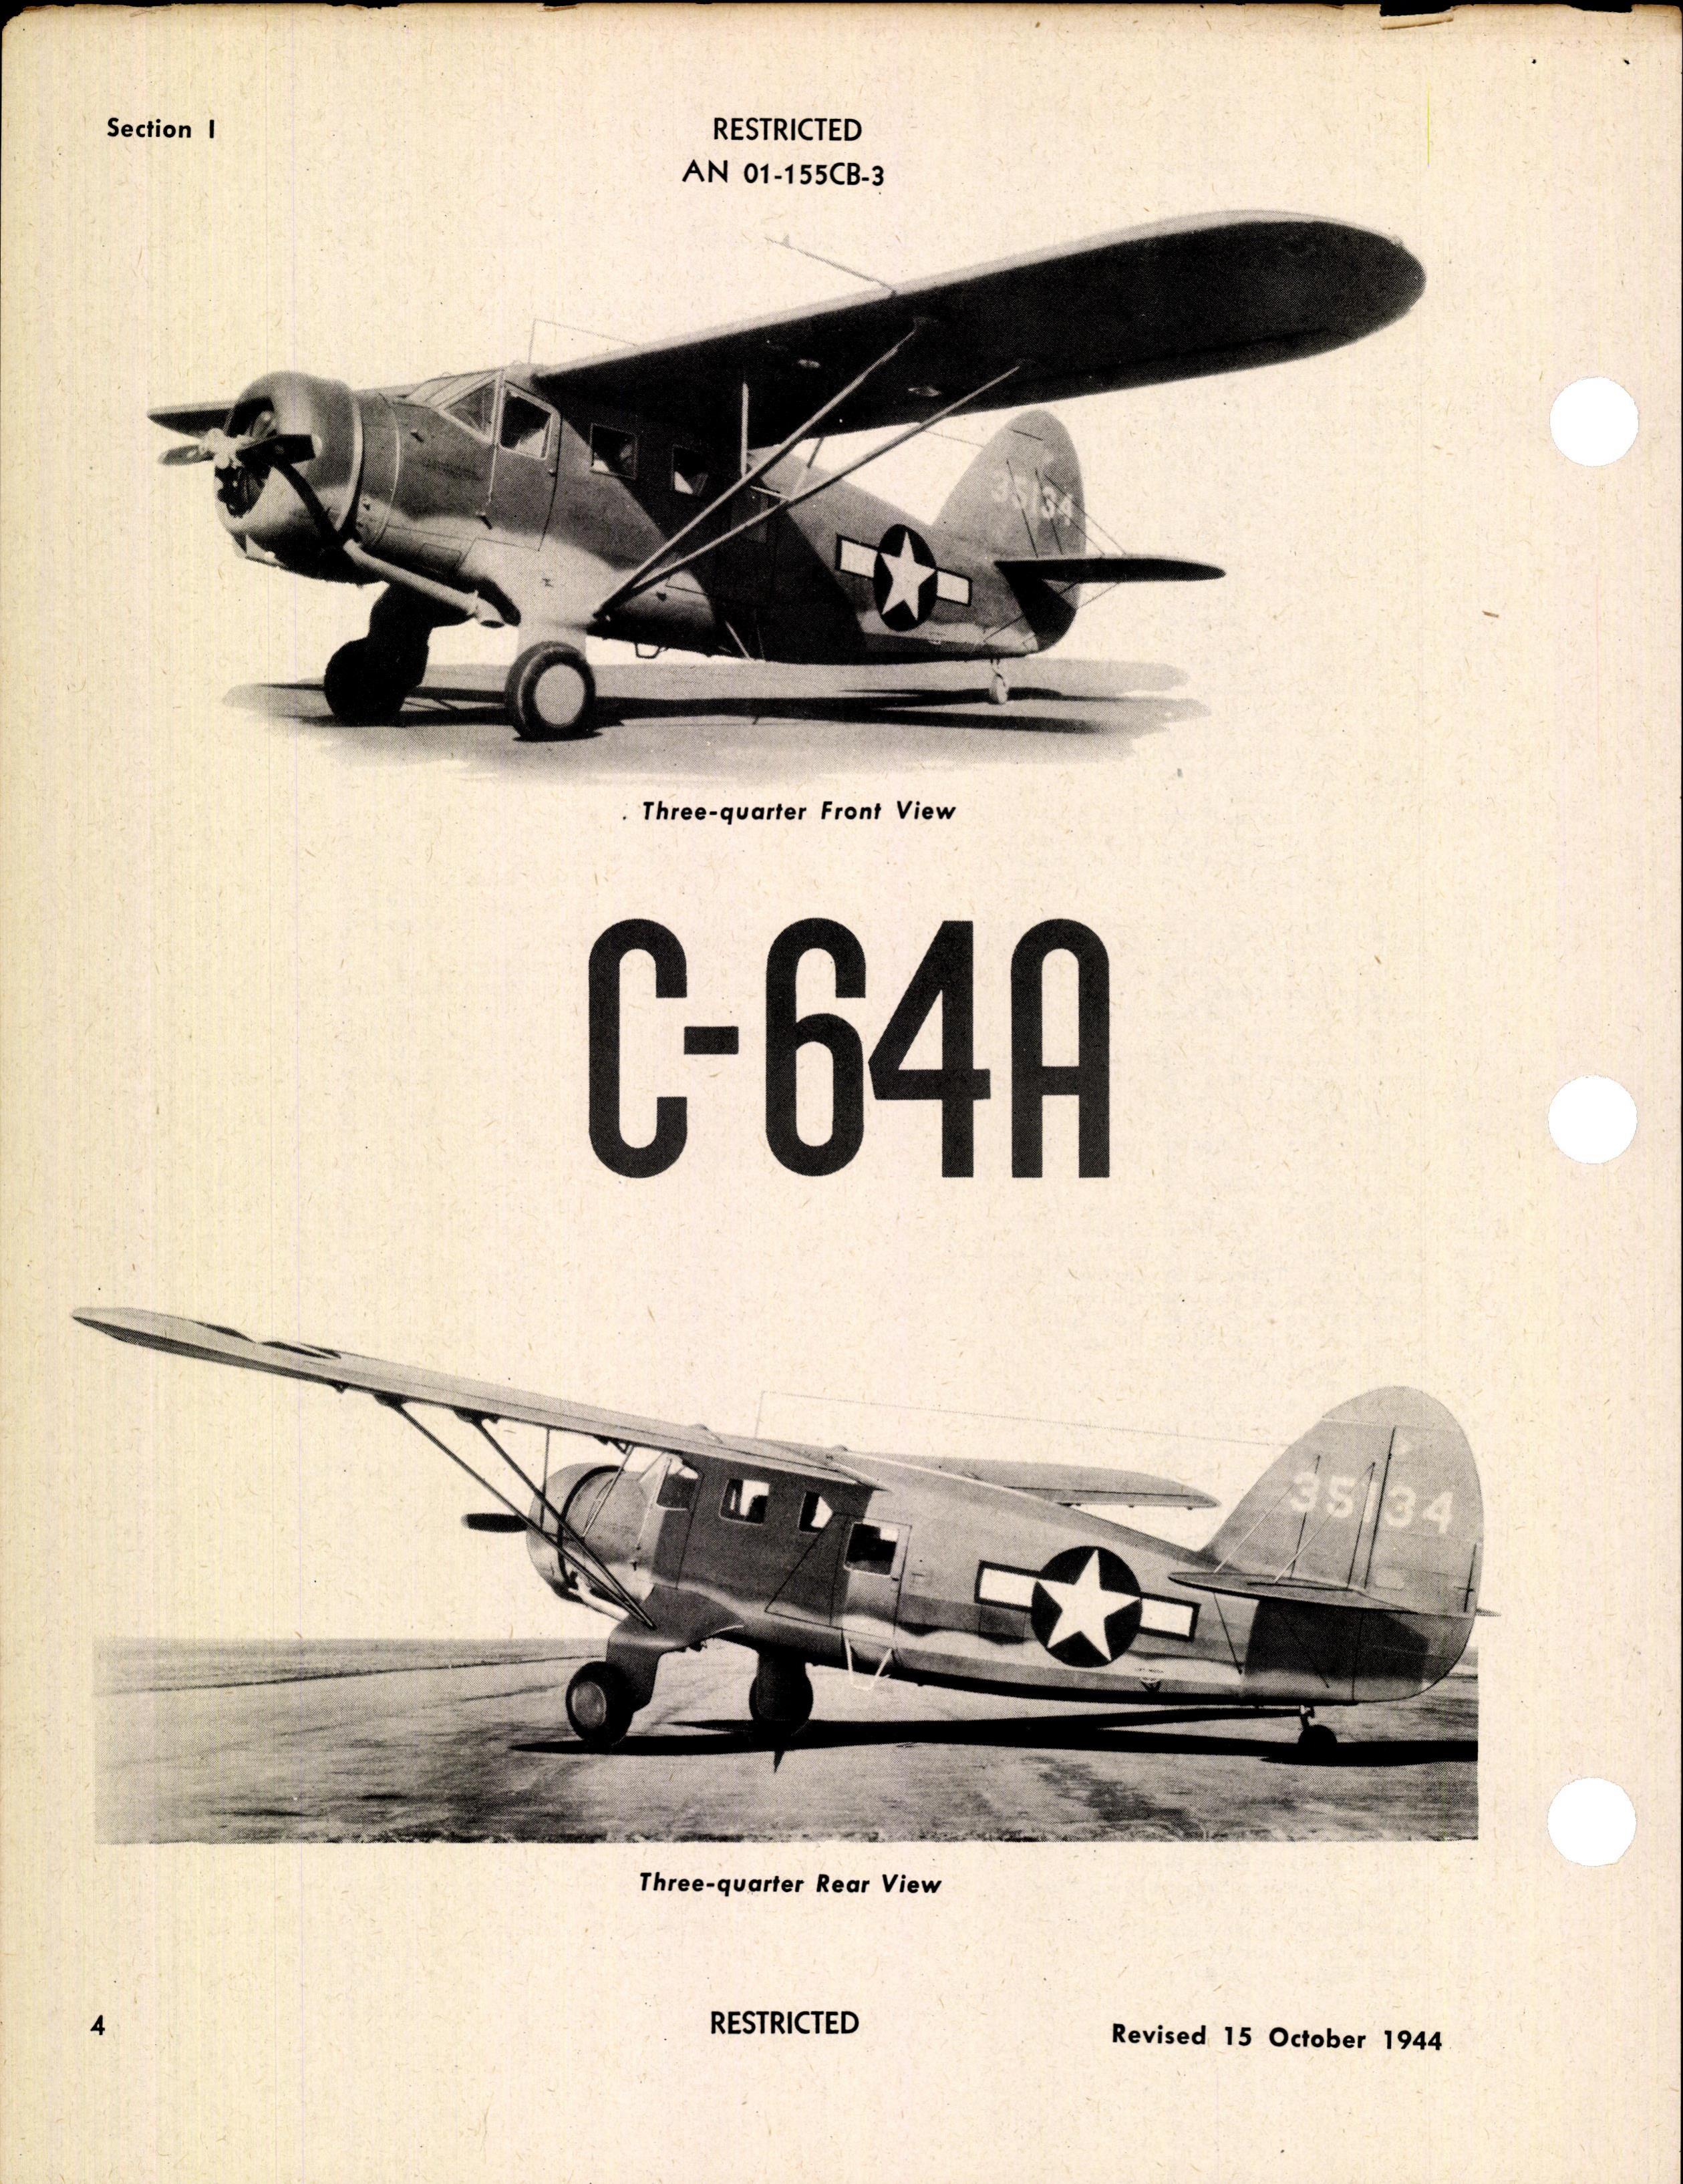 Sample page 10 from AirCorps Library document: Structural Repair Instructions for C-64A Airplanes